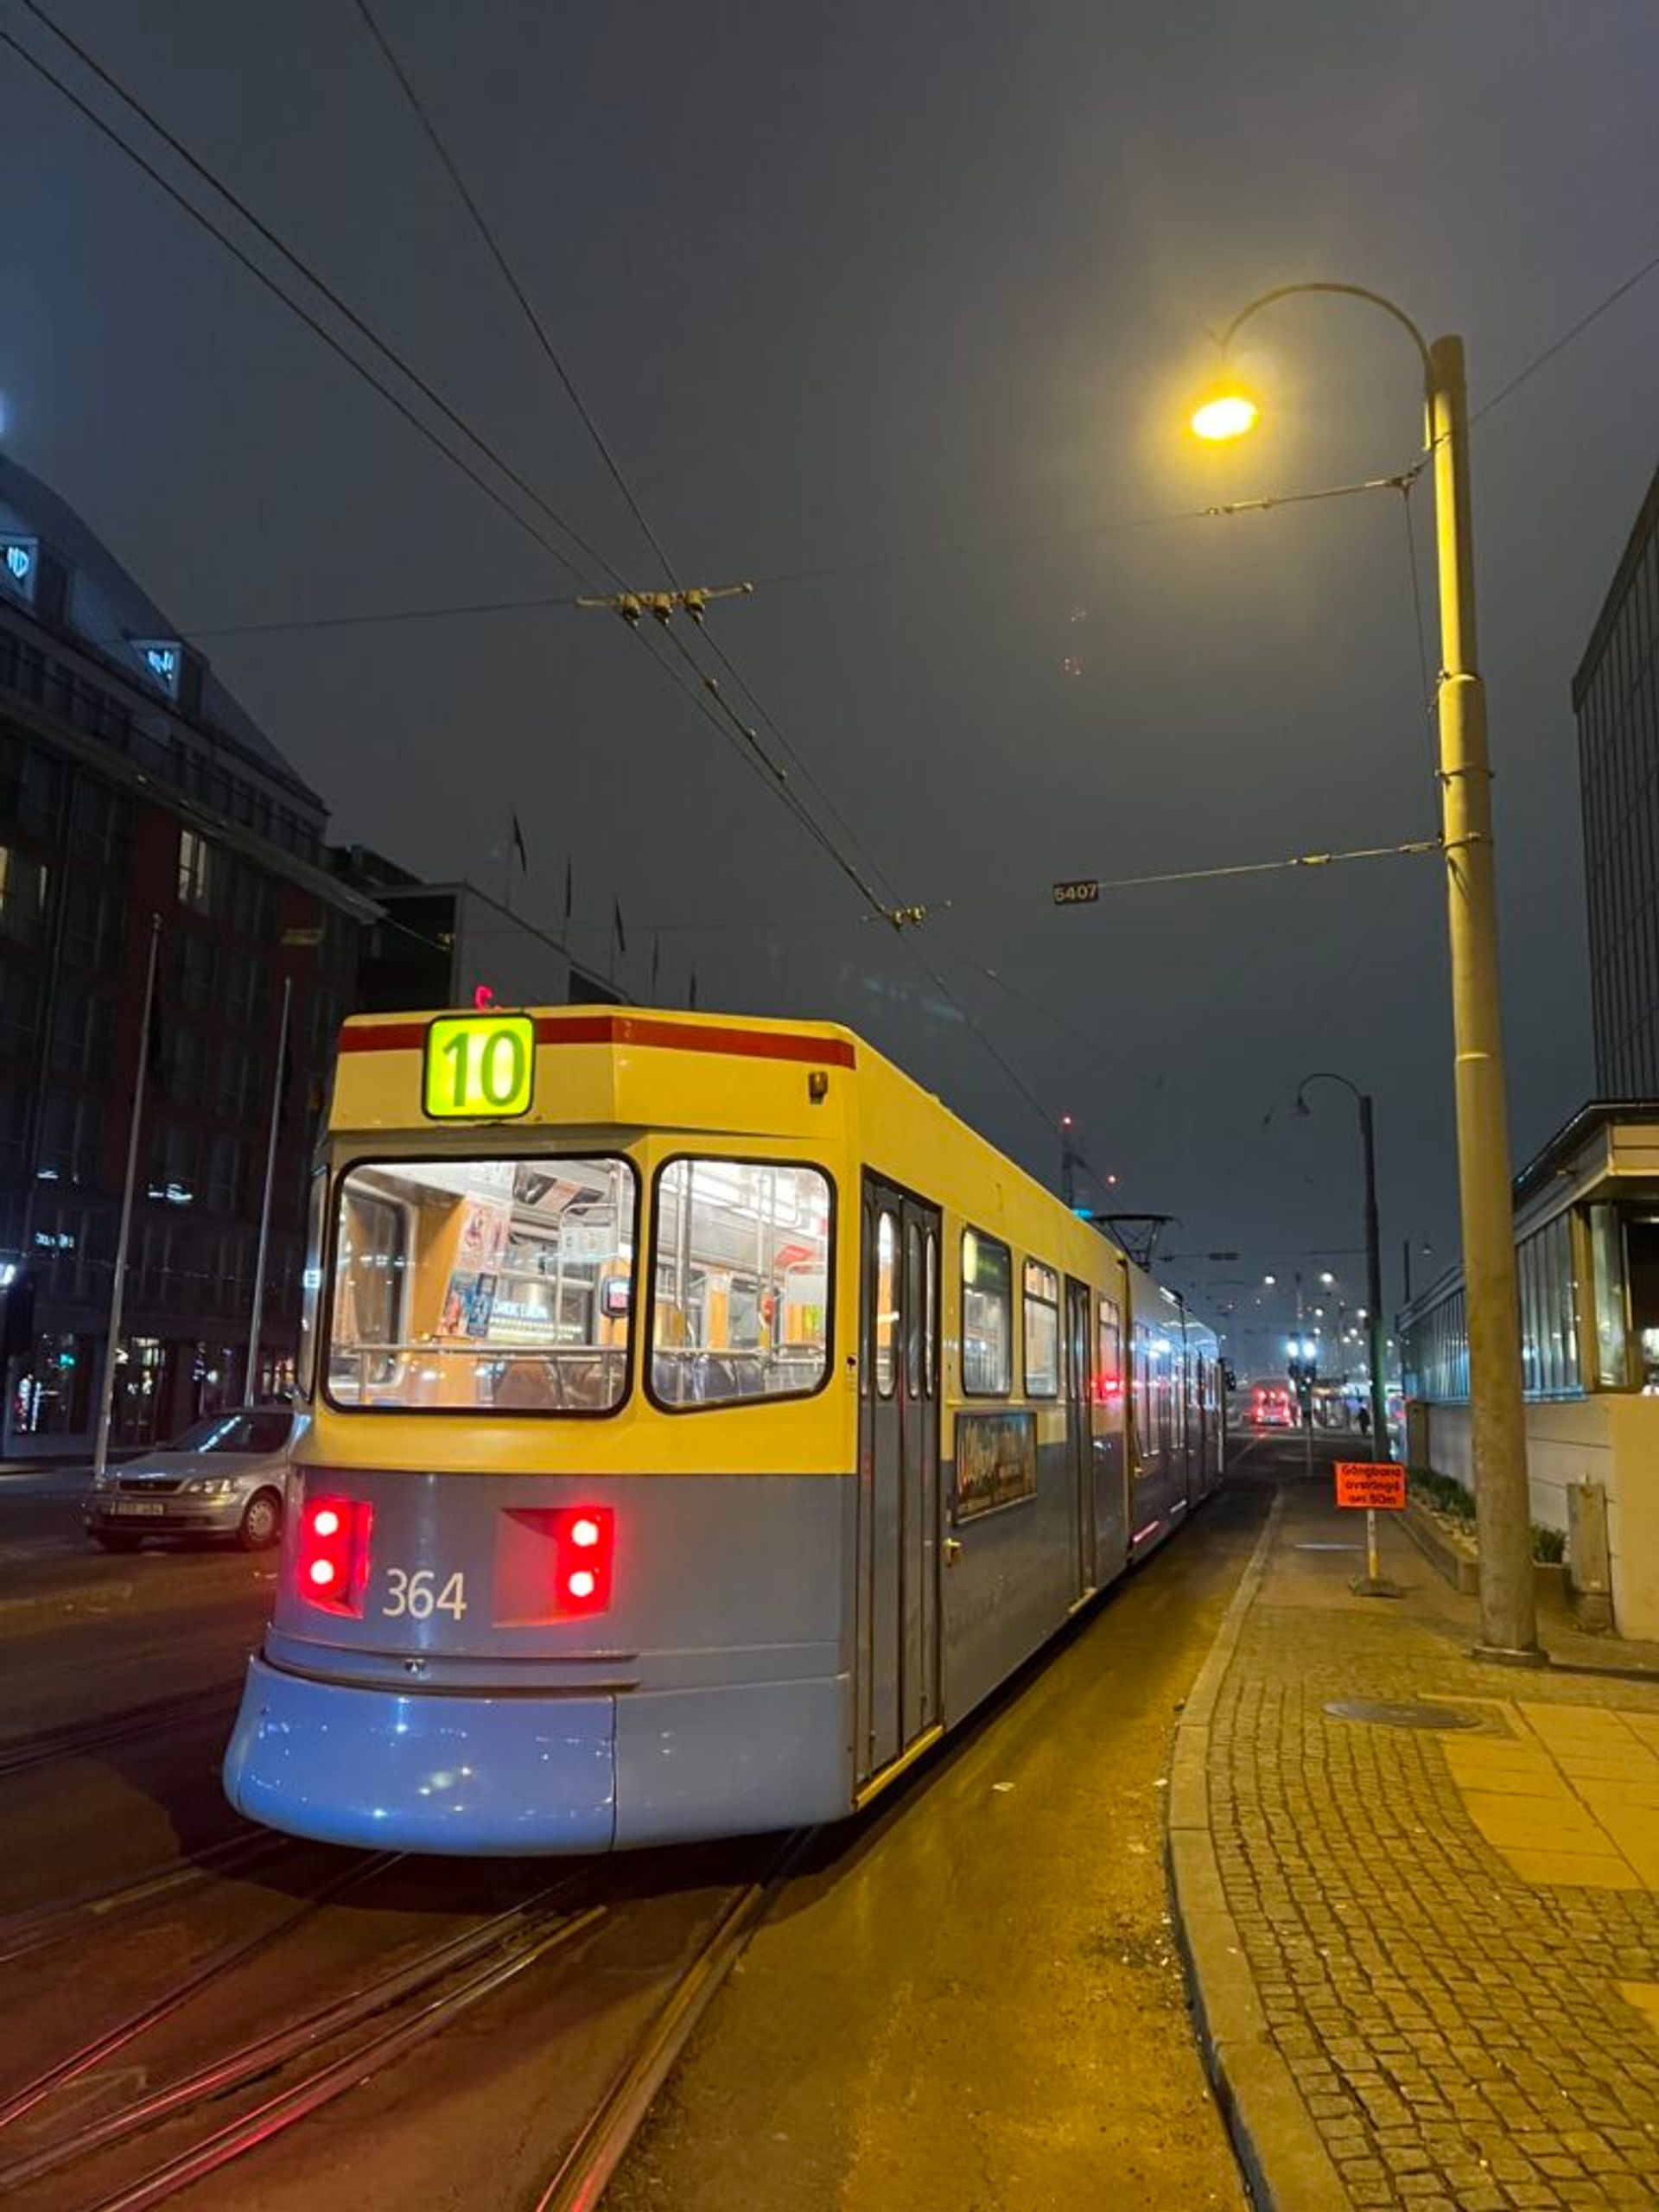 A tram in motion in an urban setting.